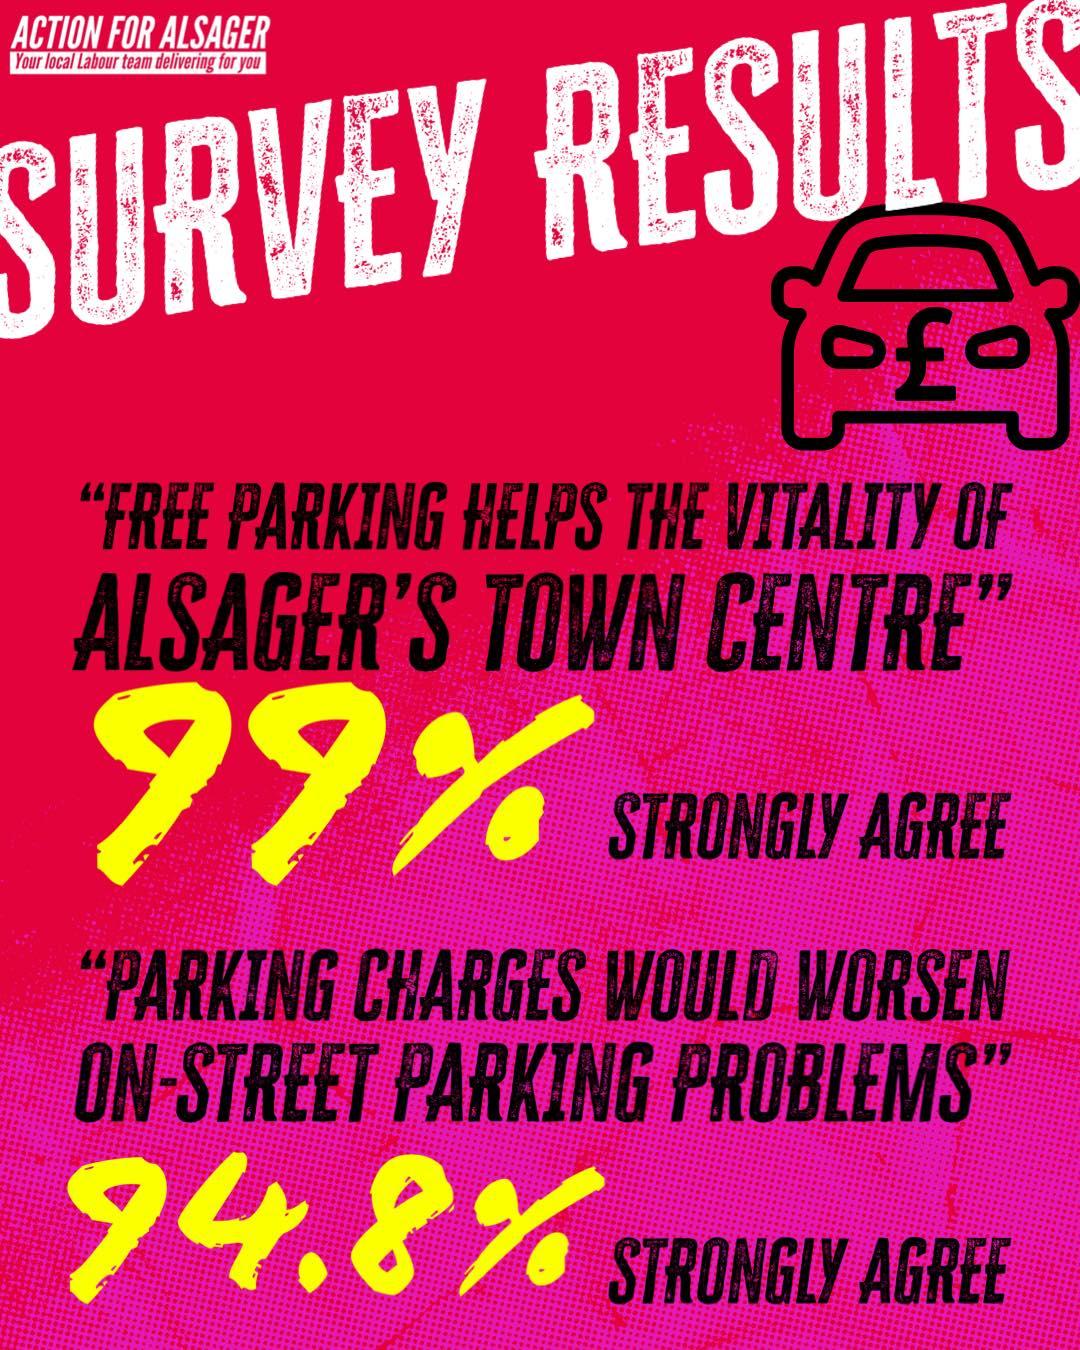 99% agree that free parking helps the vitality of Alsager